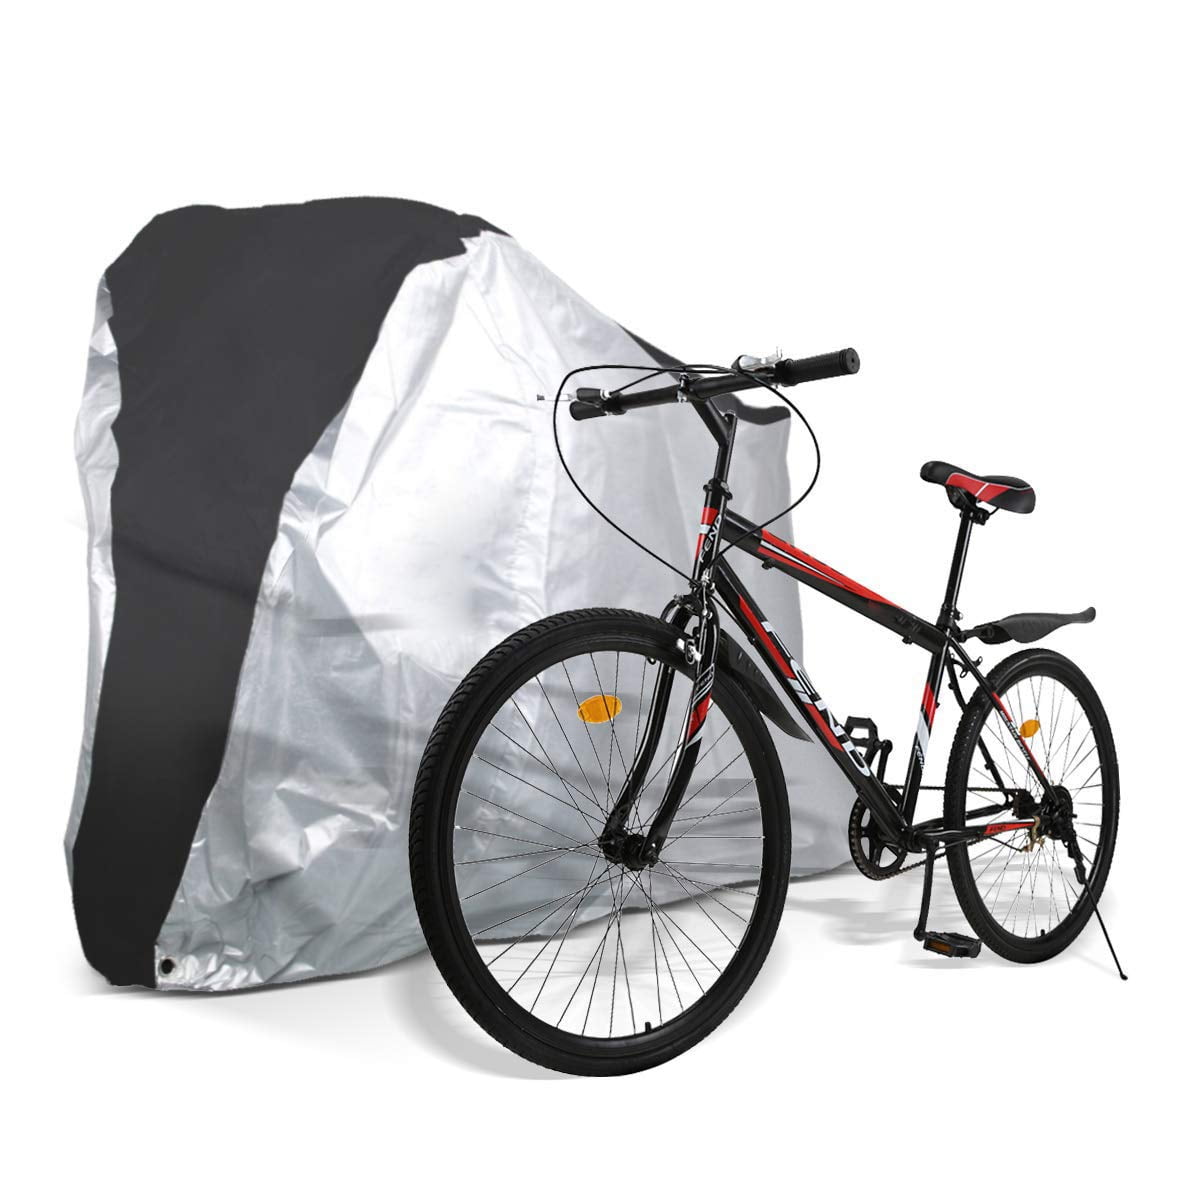 Bikecycle Cycle Polyester Cover Waterproof Bike Outdoor Rain Dust UV Protector 